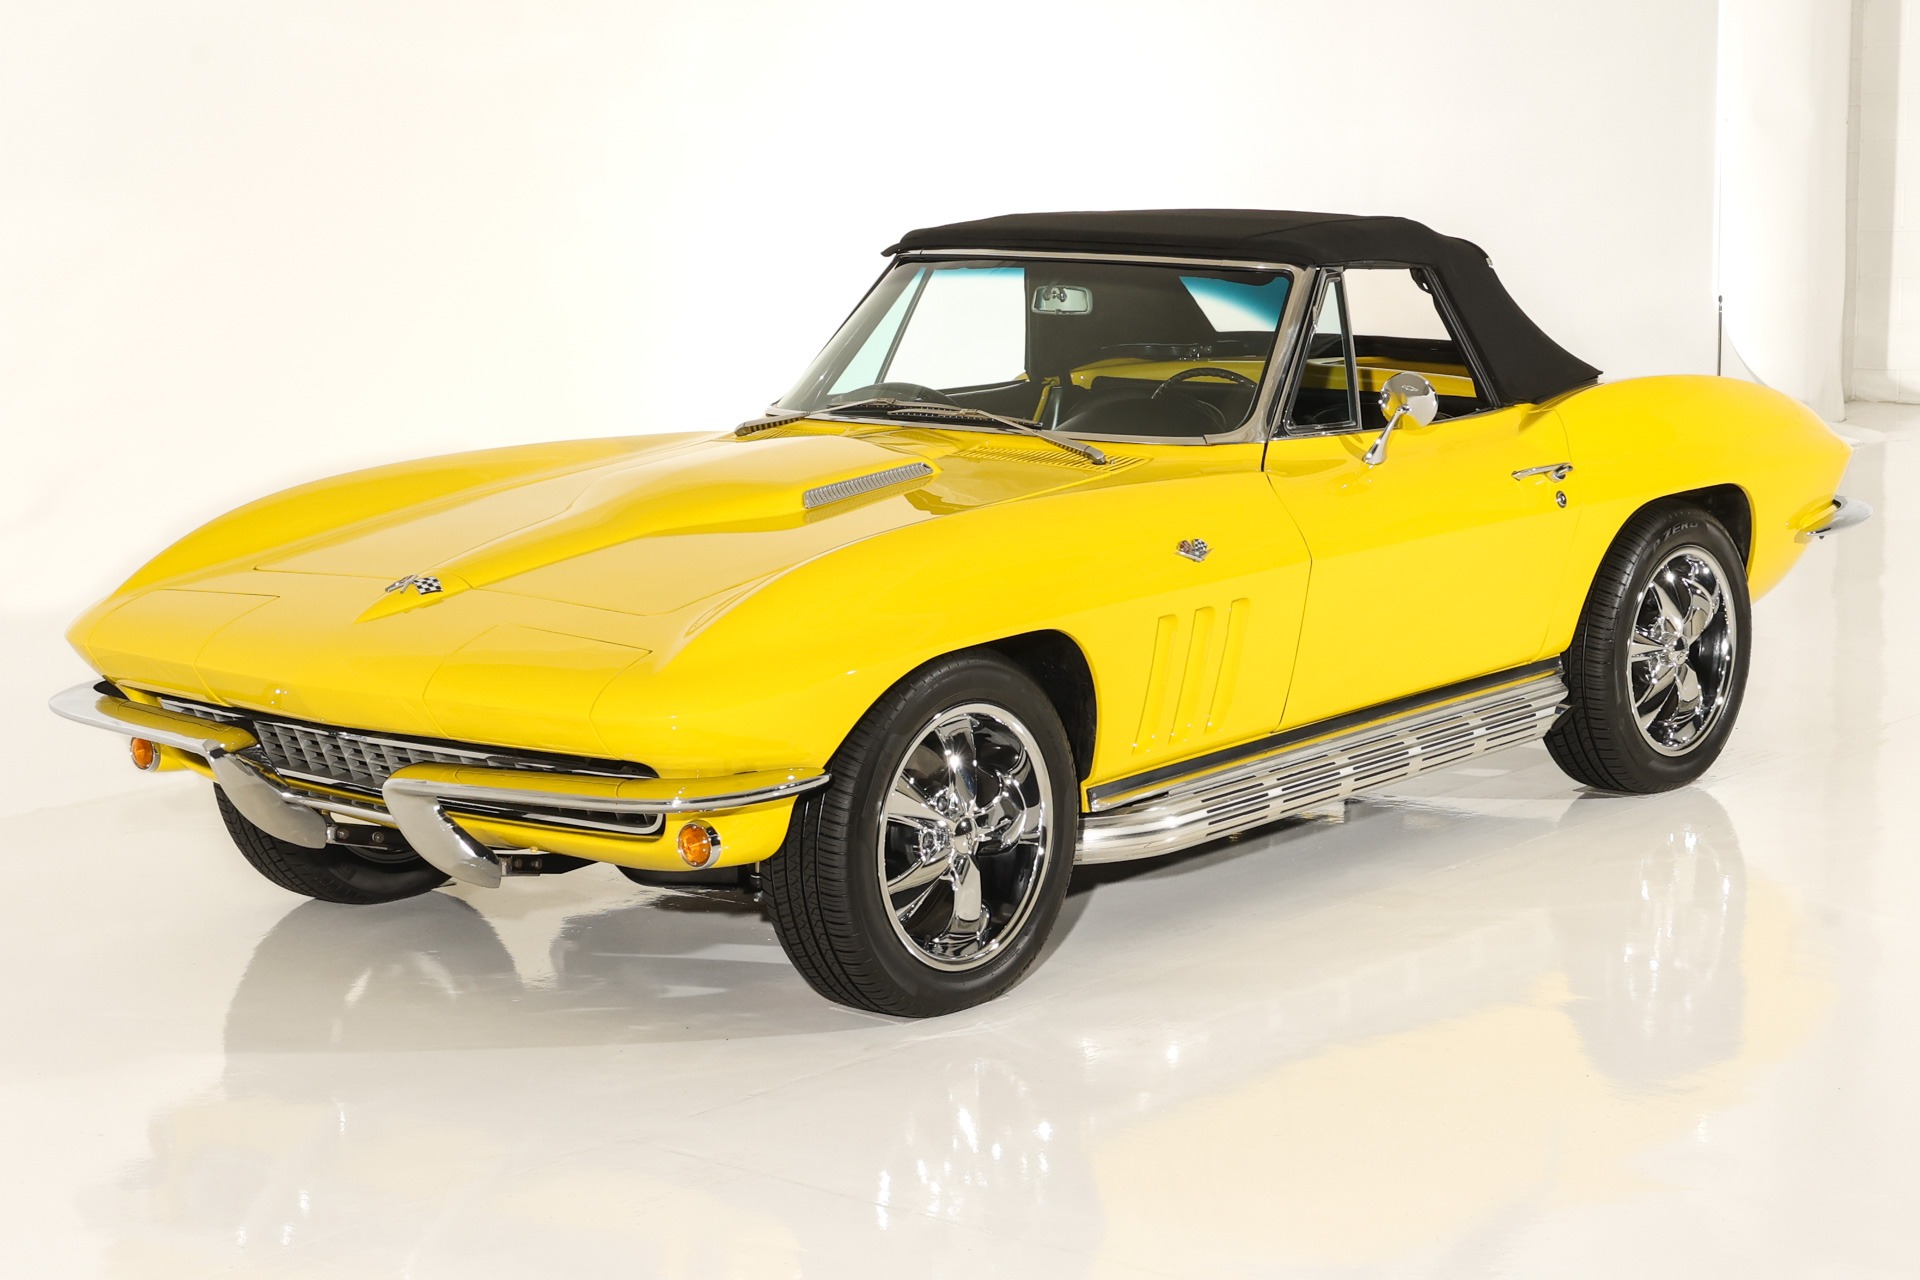 For Sale Used 1966 Chevrolet Corvette L79 #s Match 327/350 4-Speed | American Dream Machines Des Moines IA 50309